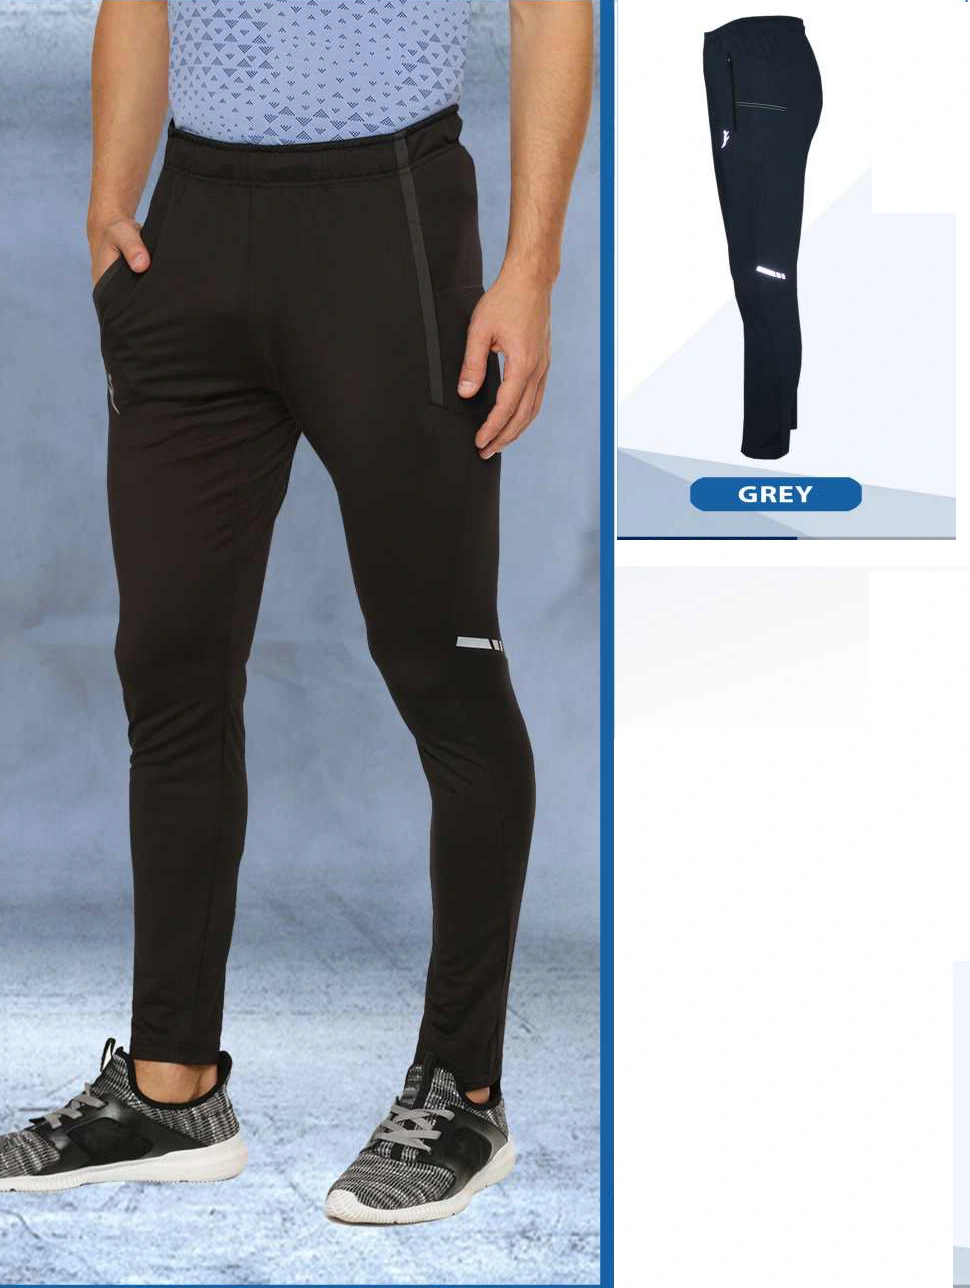 Veloz Women Narrow Bottom Trackpant For Gym  Running PantsLowers  Grey  Buy Veloz Women Narrow Bottom Trackpant For Gym  Running PantsLowers   Grey Online at Best Price in India  Nykaa